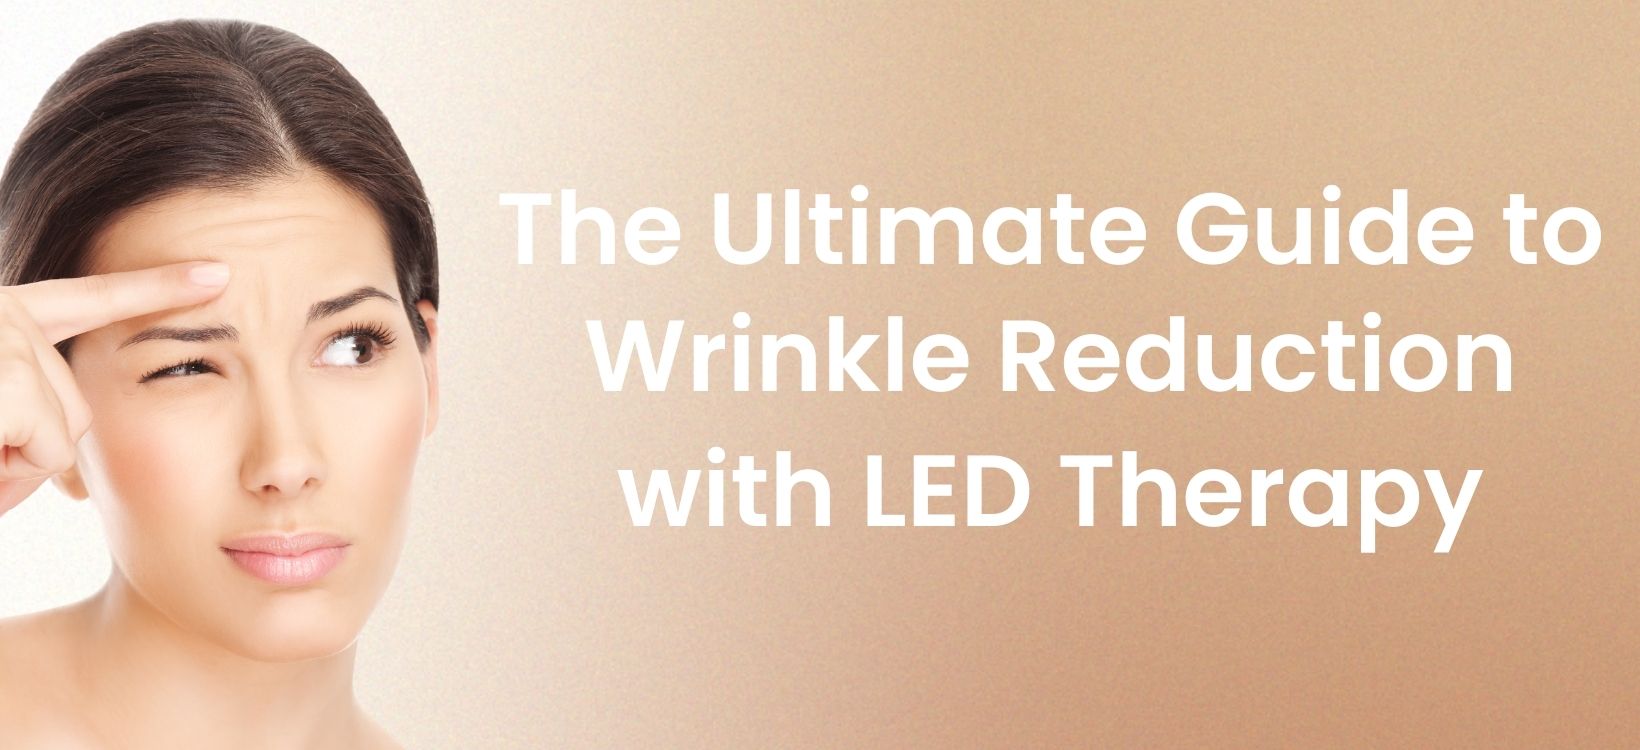 The Ultimate Guide to Wrinkle Reduction with LED therapy